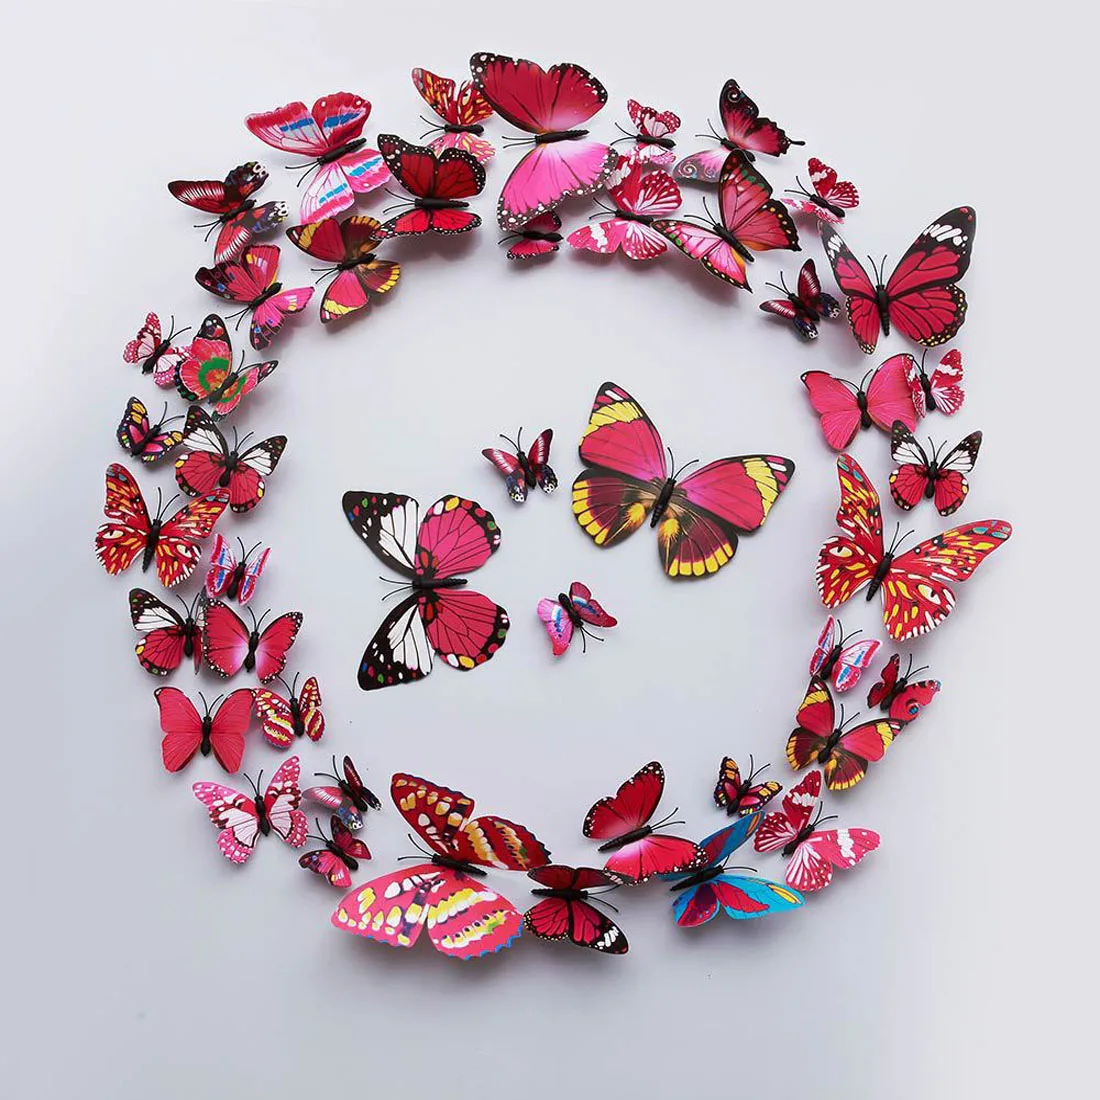 12PC Christmas Wedding Red Butterfly Party Magnetic Home Decorations 